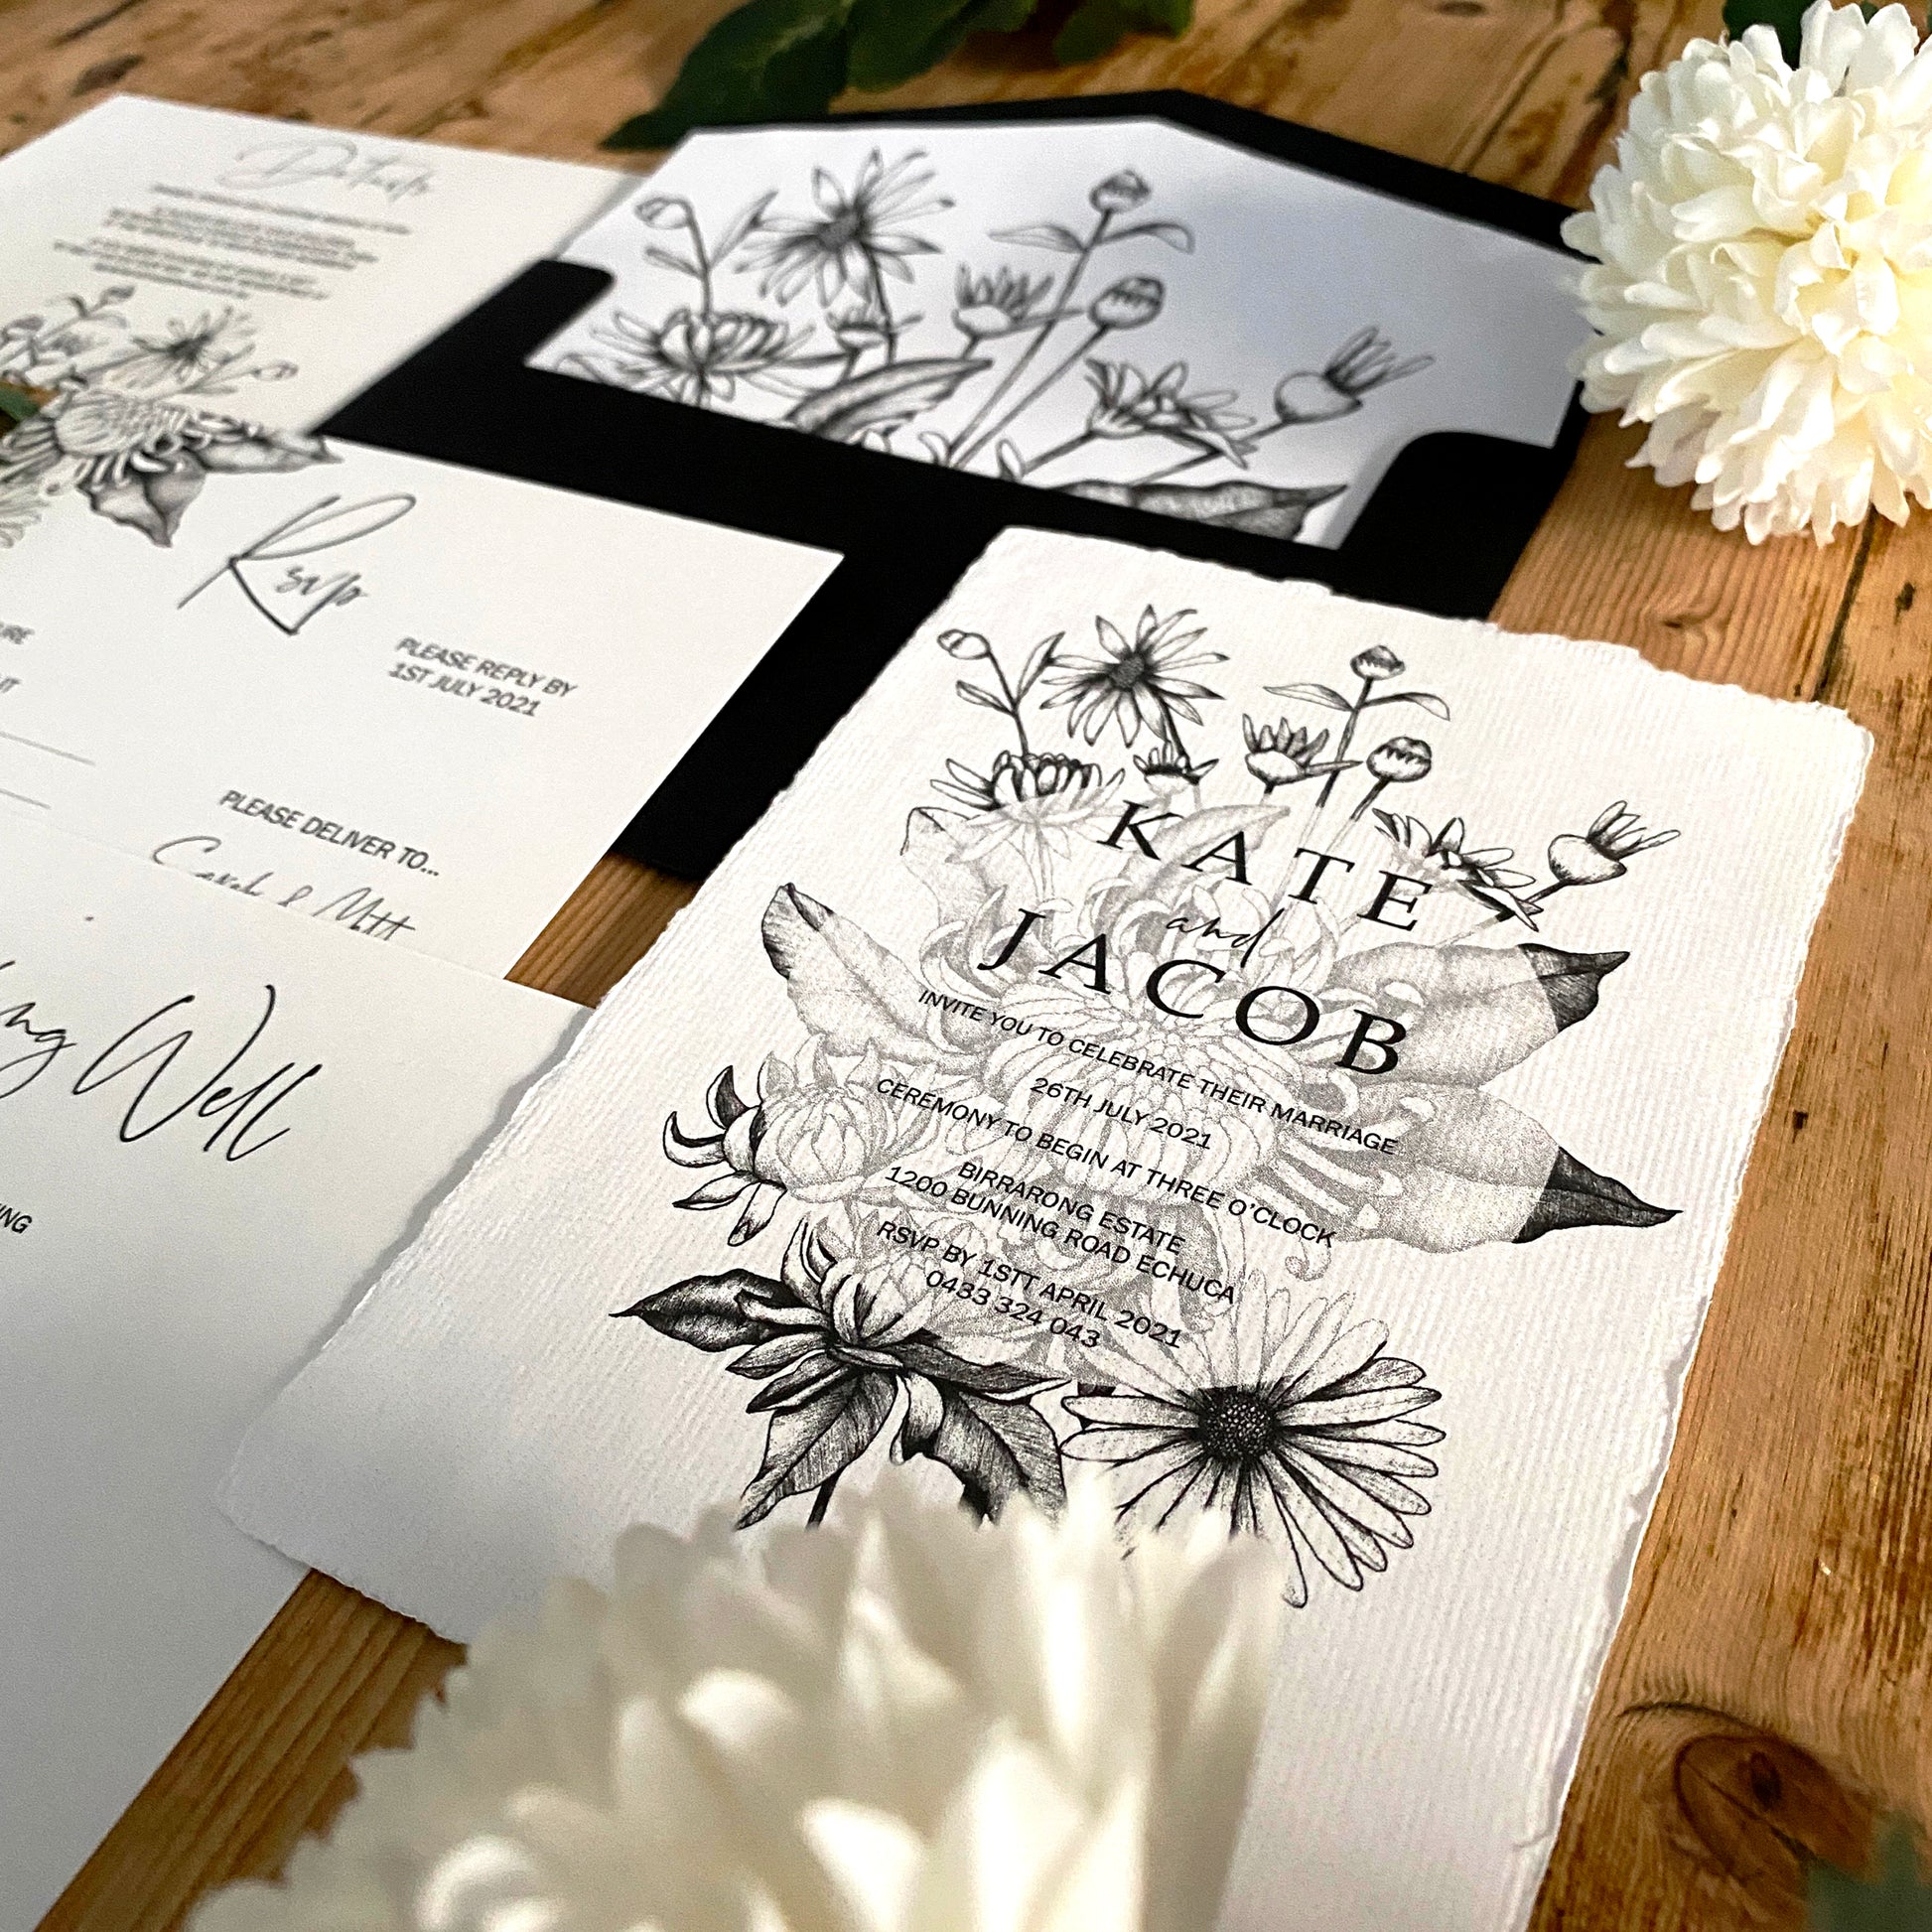 Chrysanthemum invites, printed onto a cotton deckled hand made paper, with pretty line art featuring daisies, chrysanthemums